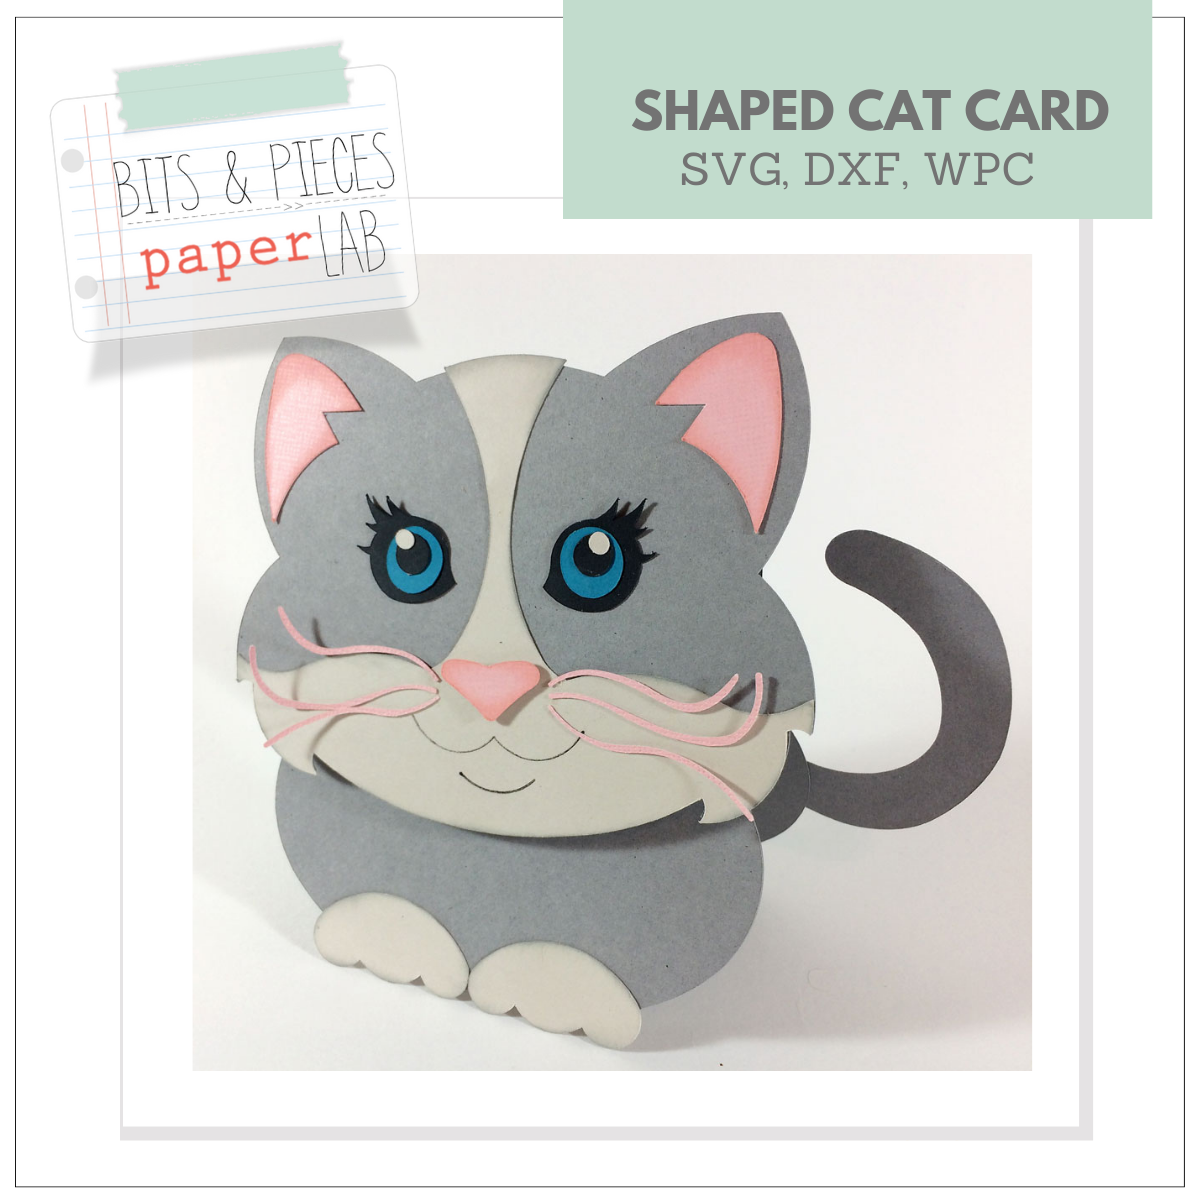 CAT SHAPED CARD SVG FOR CAT LOVERS